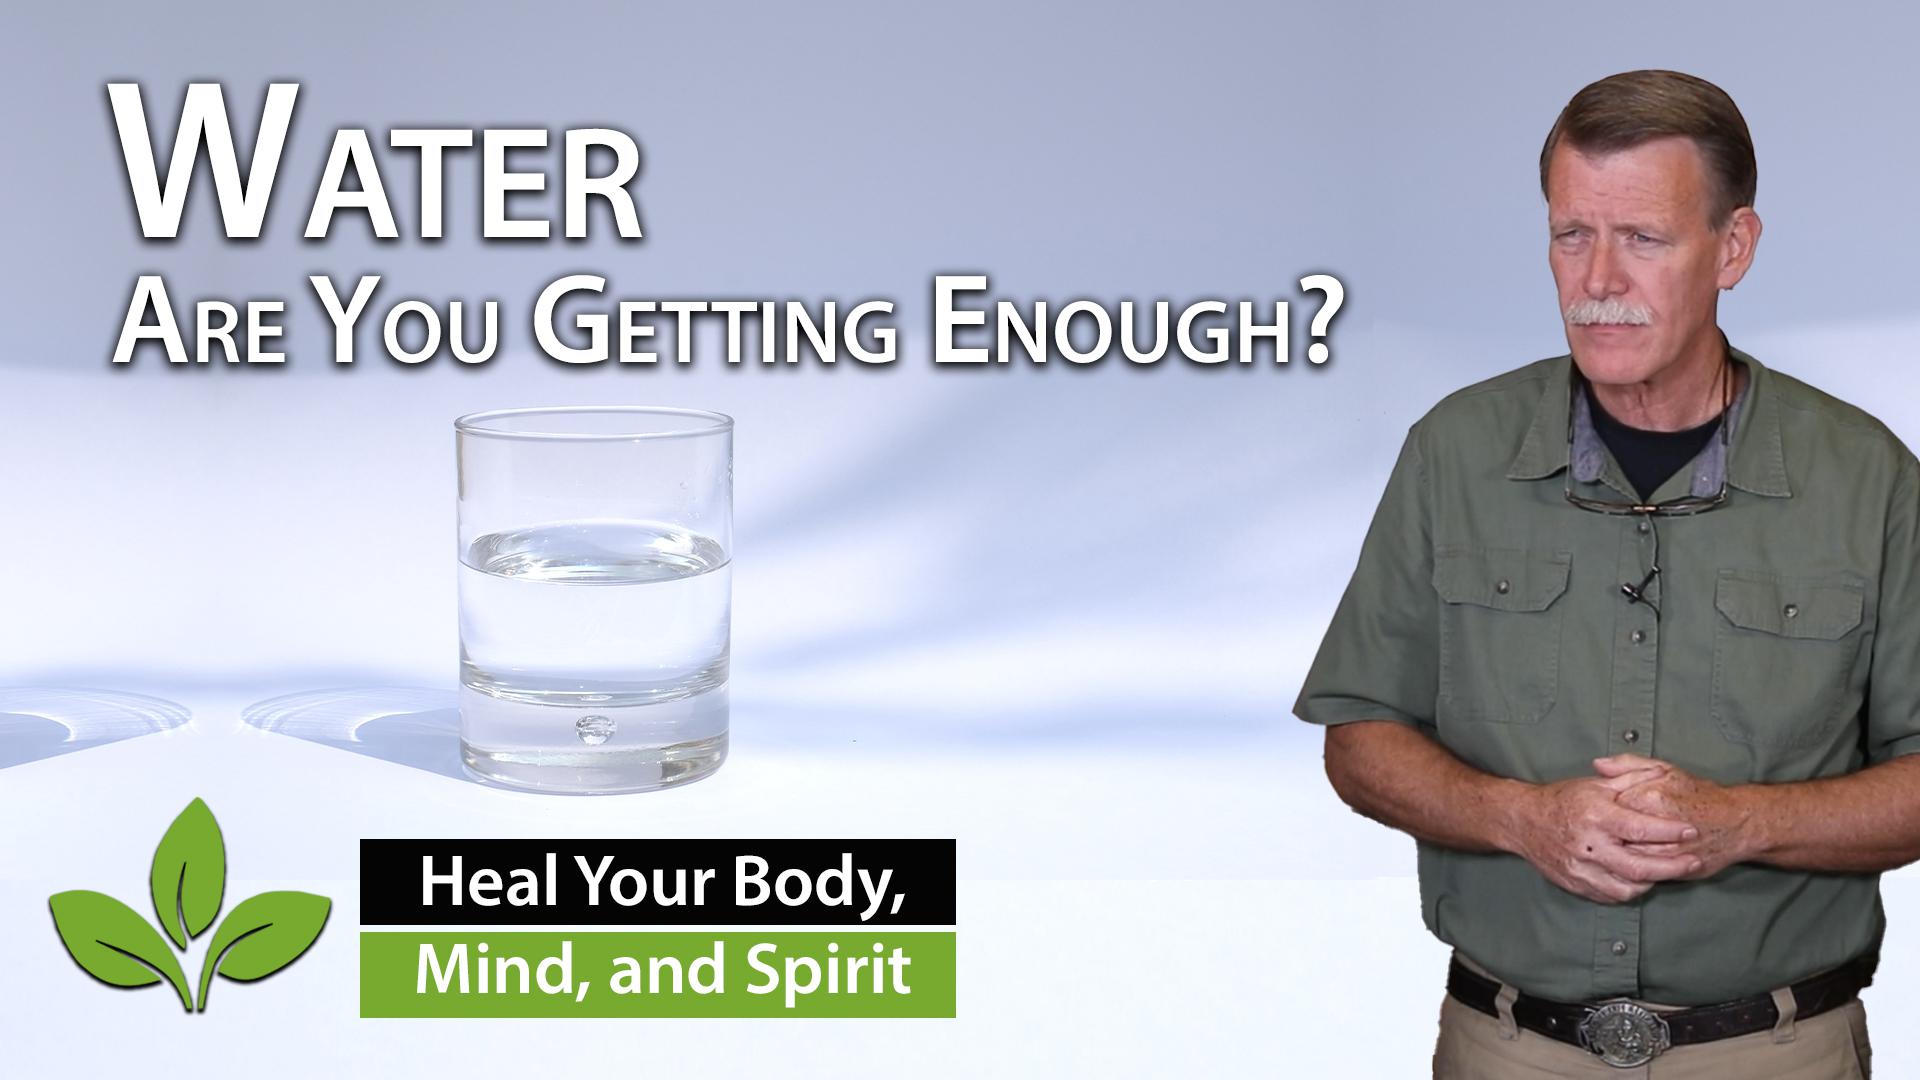 Water: Are You Getting Enough?